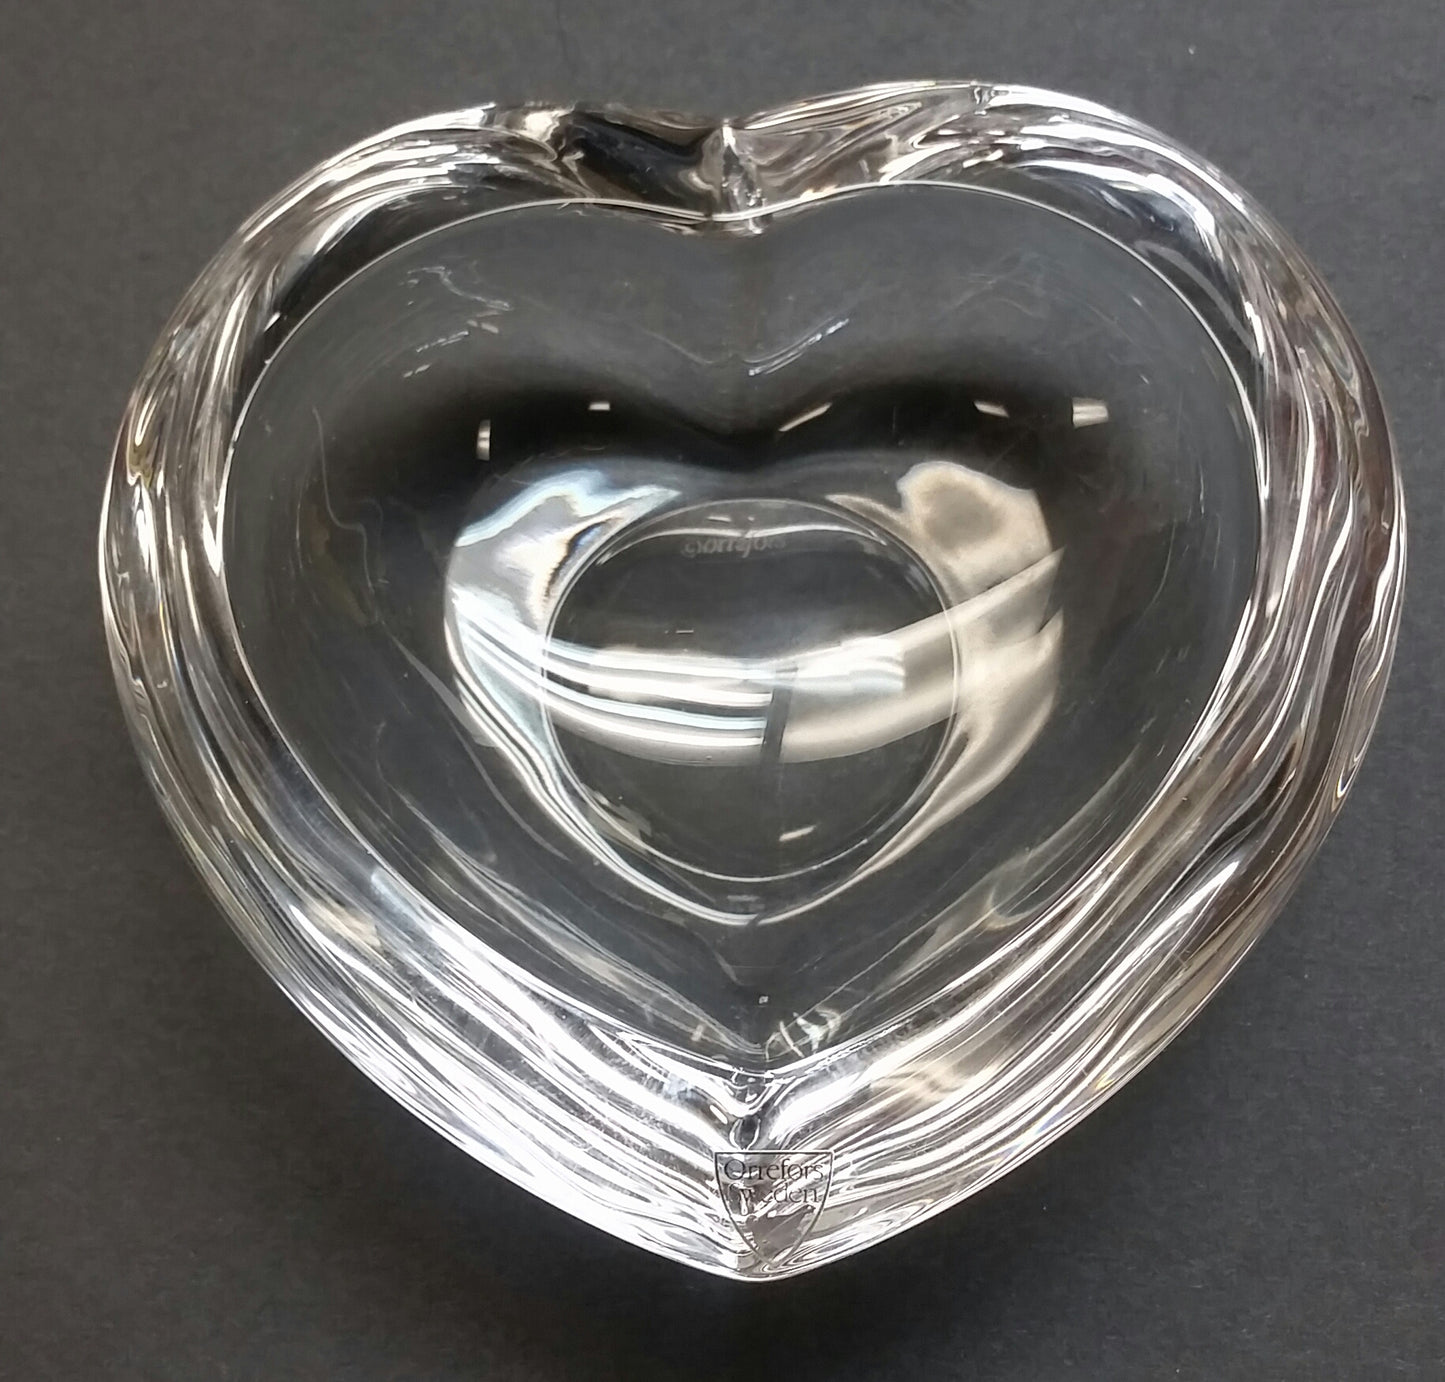 Signed Orrefors glass heart shape dish  crystal - O'Rourke crystal awards & gifts abp cut glass